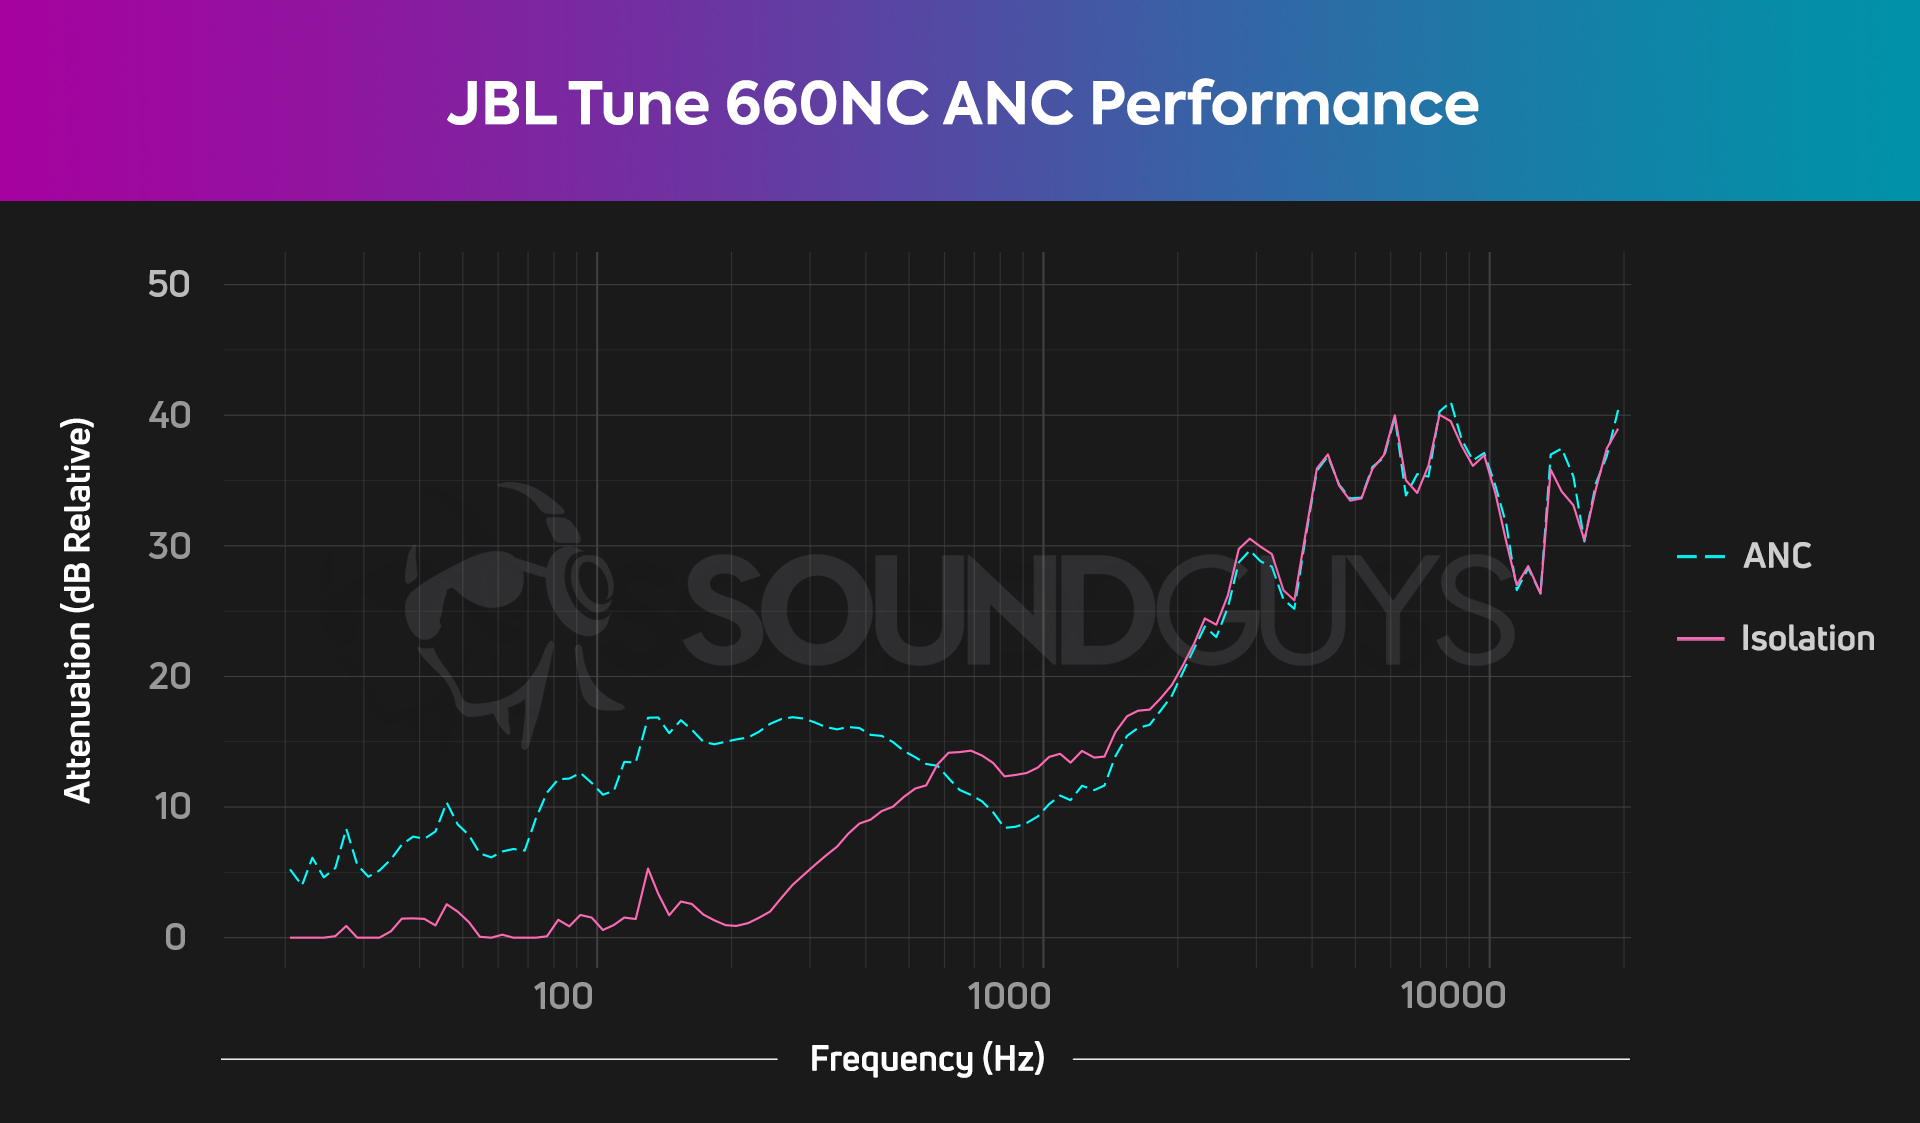 JBL Tune 660NC isolation and ANC chart showing significant attenuation to high frequencies